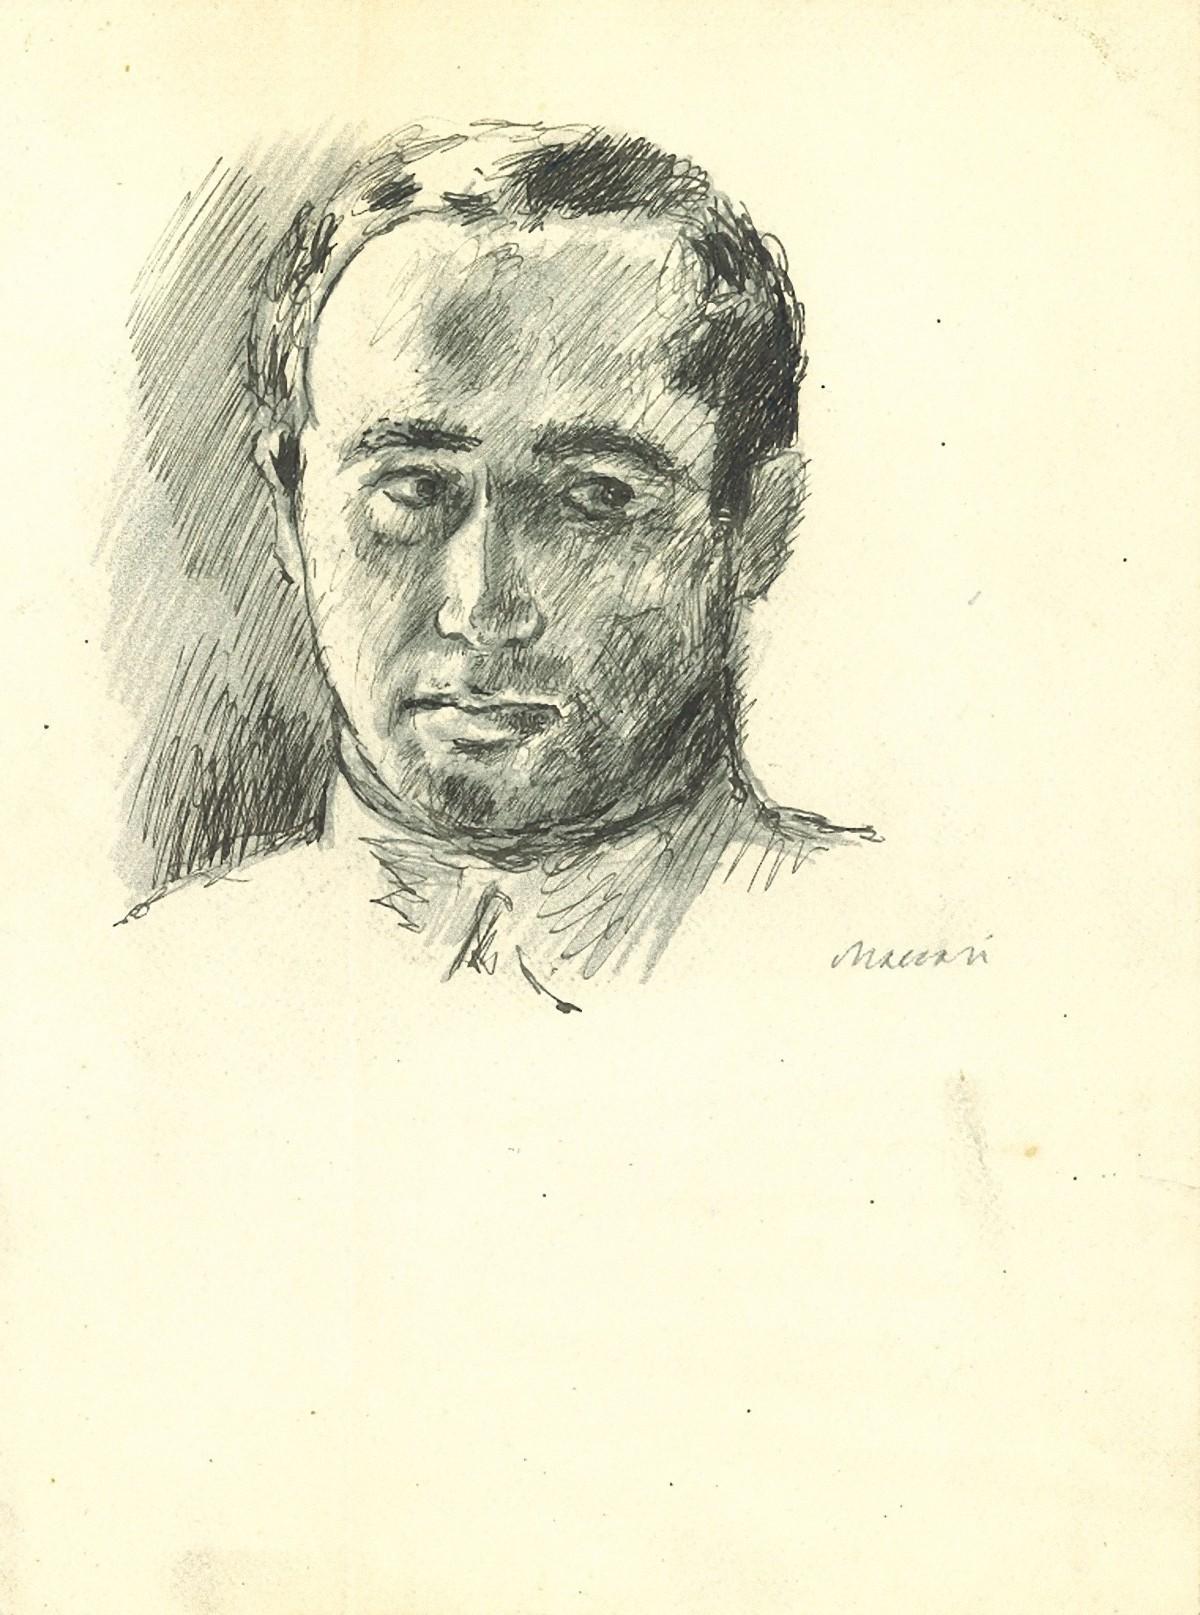 Ritratto Maschile con Colletto (Portrait of a Man with collar) is an original drawing on paper, realized around the 1960s by the great Italian artist and journalist Mino Maccari (Siena, 1898 - 1989).

Pencil and fountain pen on laid watercolor